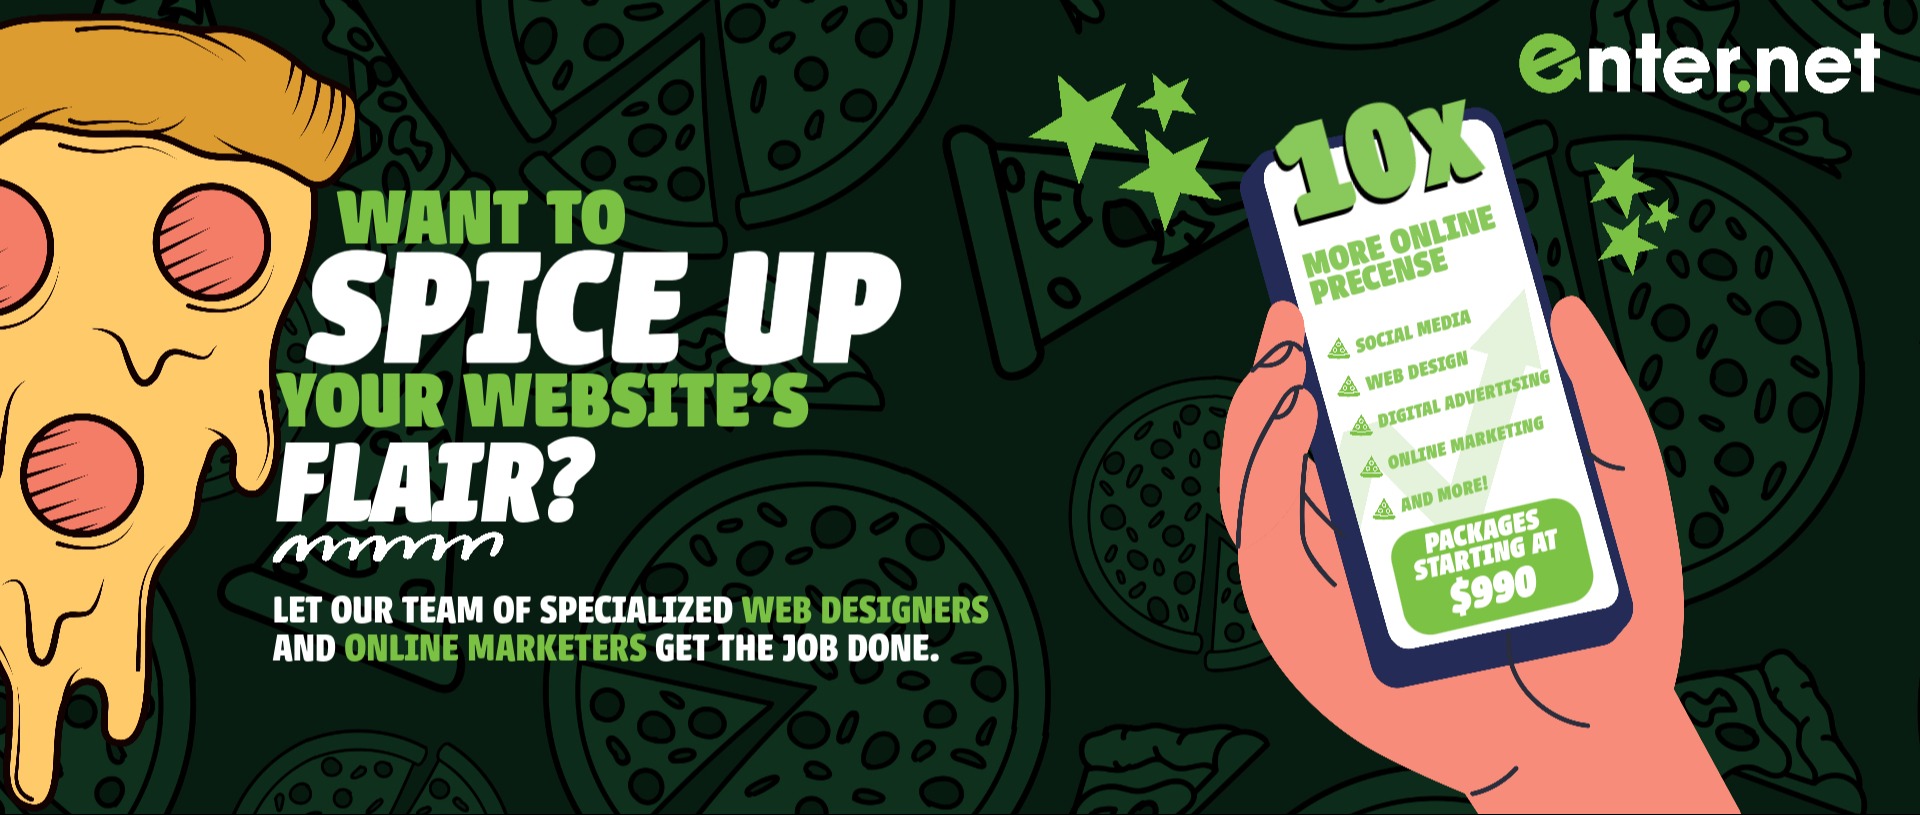 All in One Pizza Online Marketing Package! 100